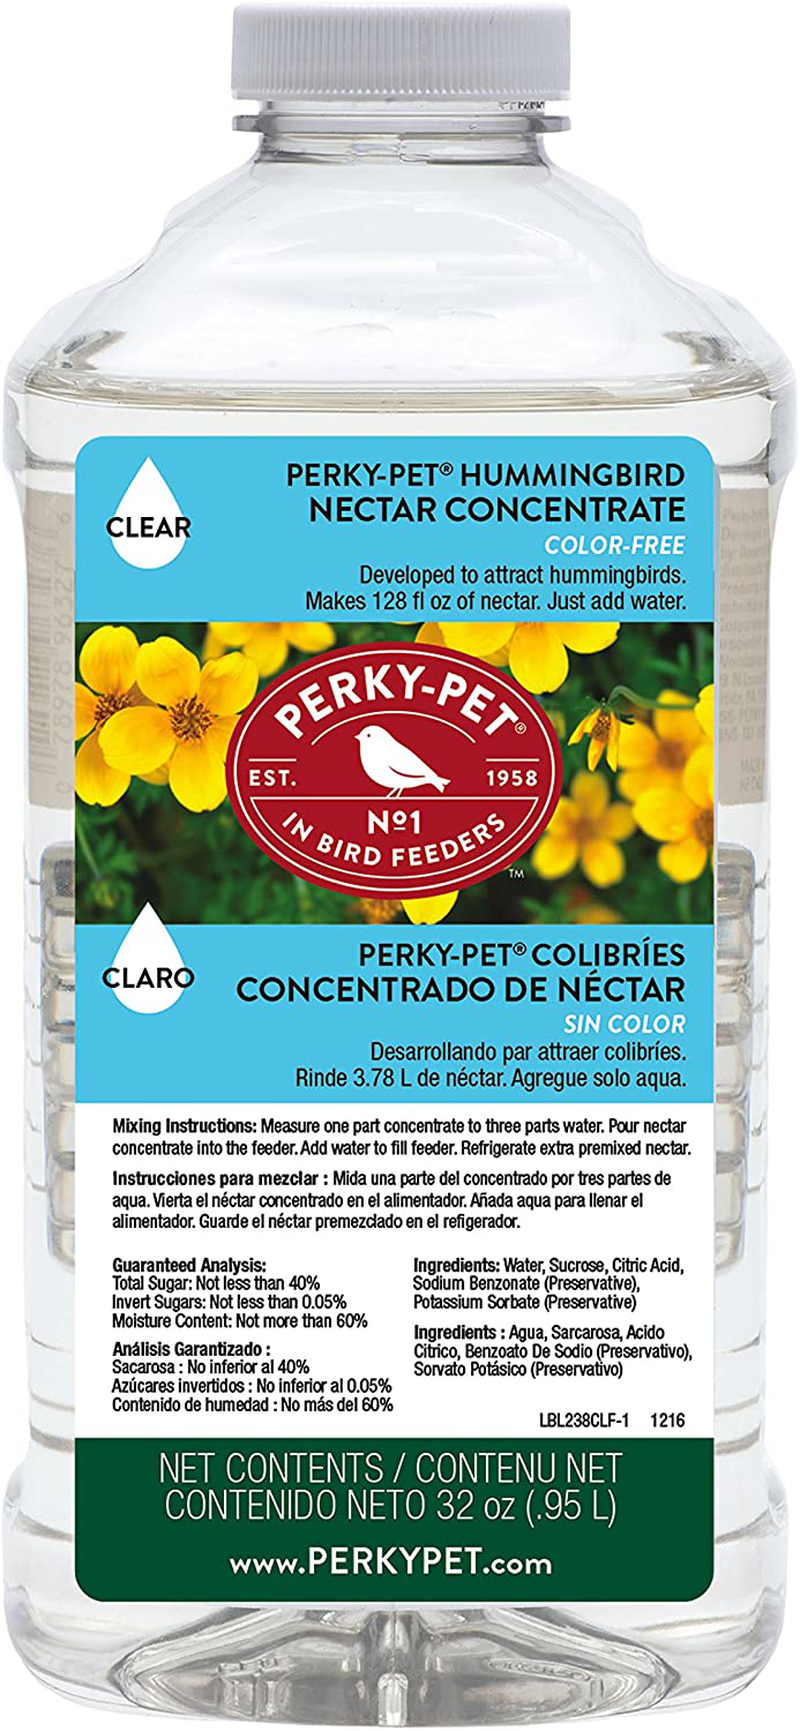 Perky-Pet 247CL 16 fl oz Clear Hummingbird Nectar Concentrate `